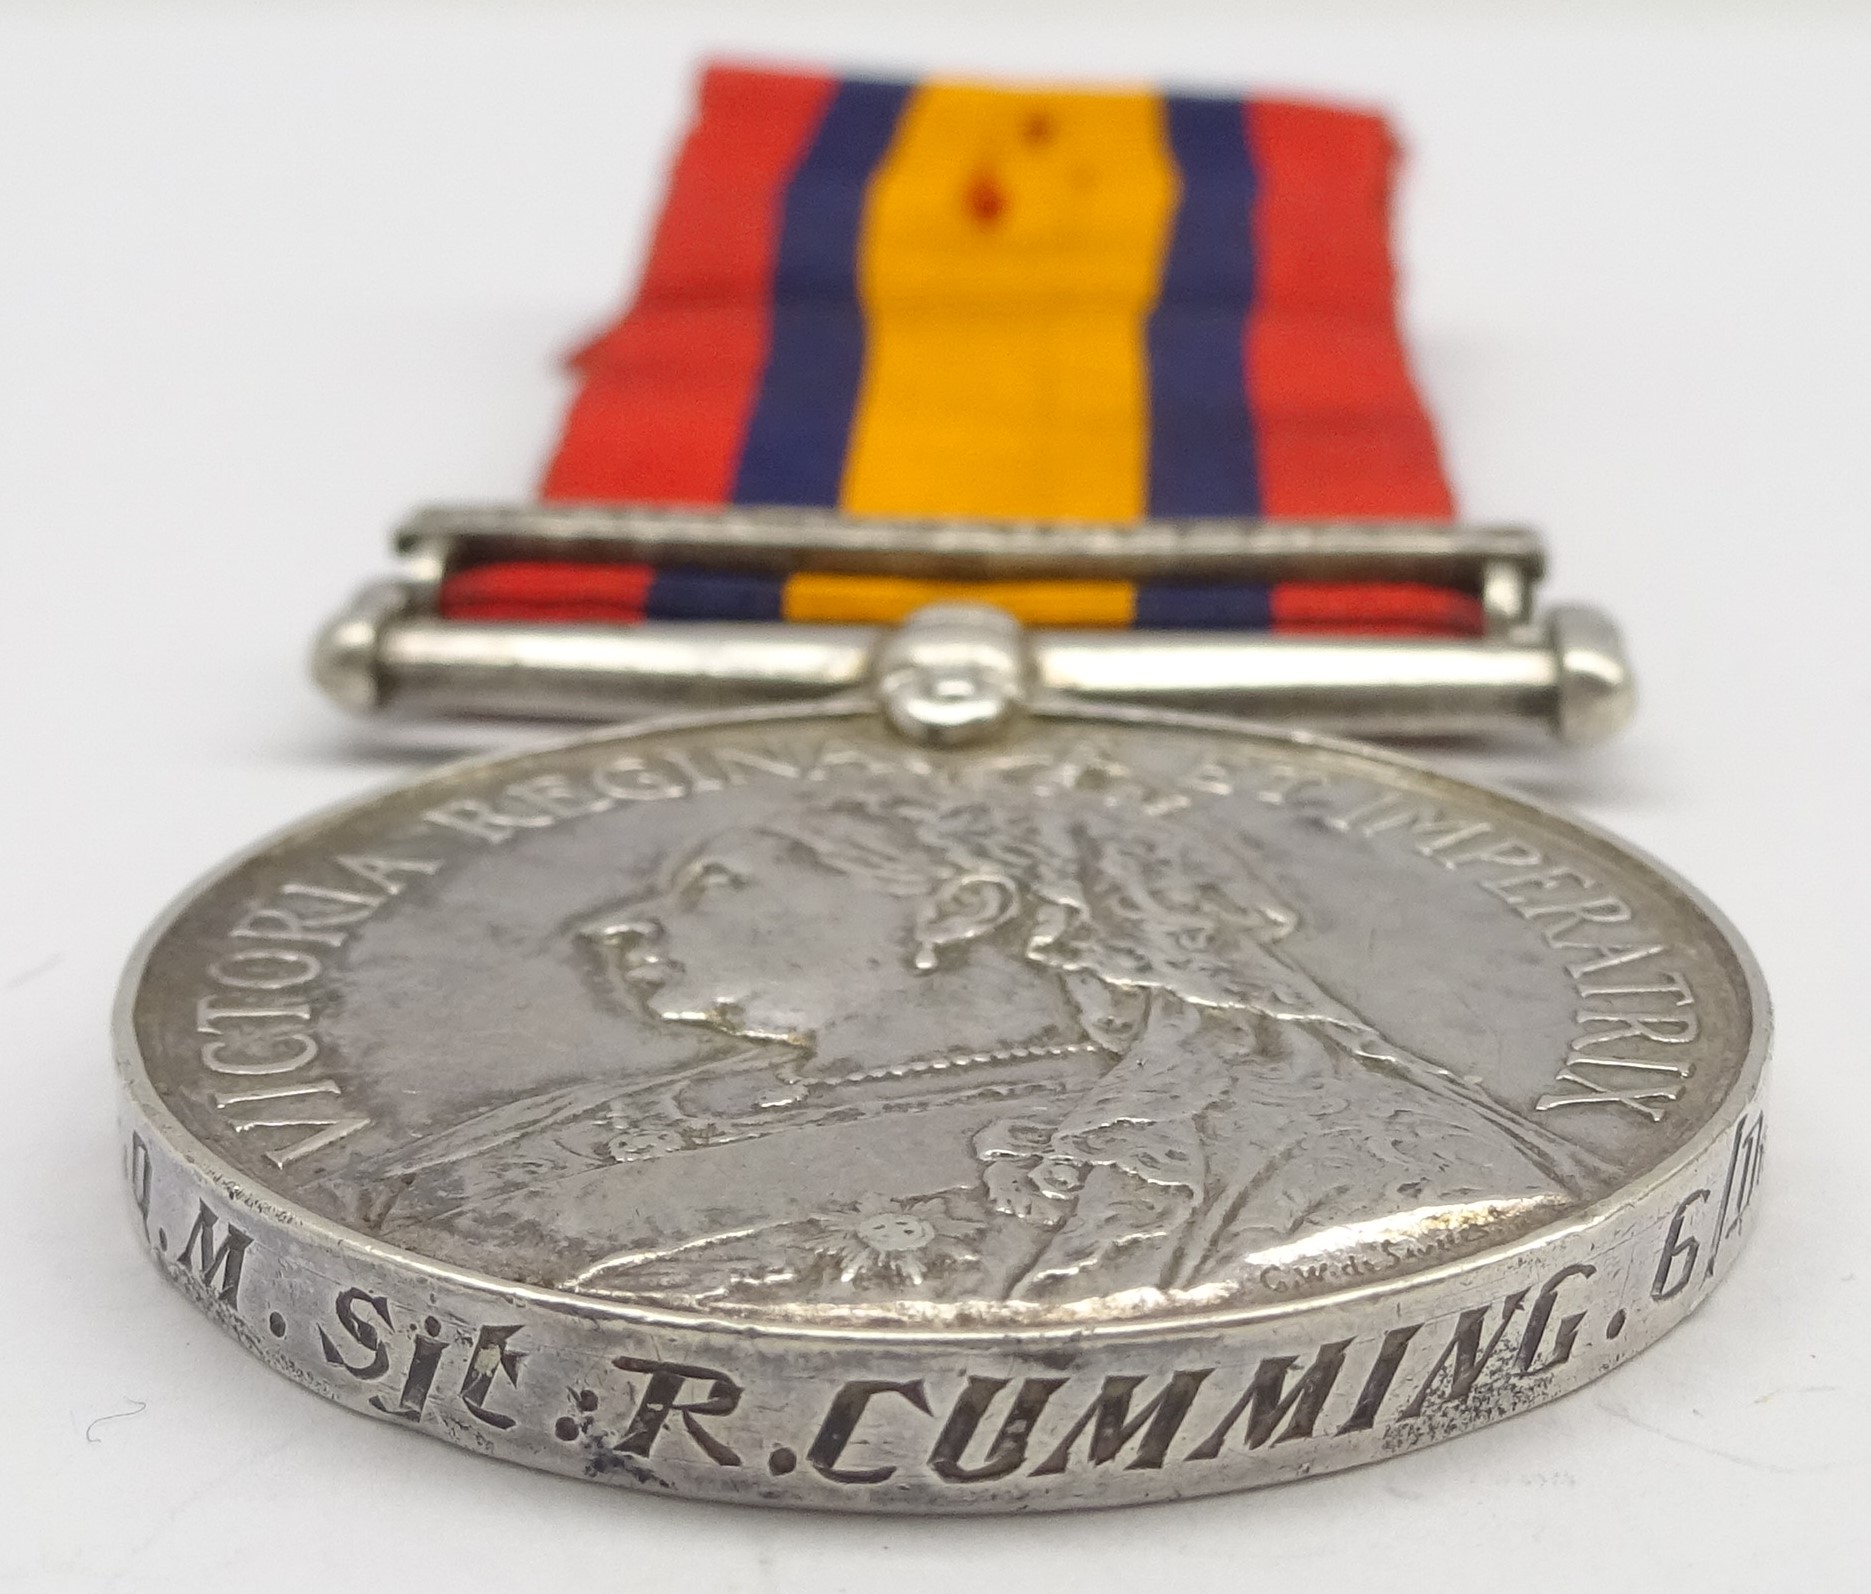 Victorian Queen's South Africa medal awarded to 2324 Sq. Q.M. Sjt. R. Cumming 6/Dn. Gds. - Image 3 of 3